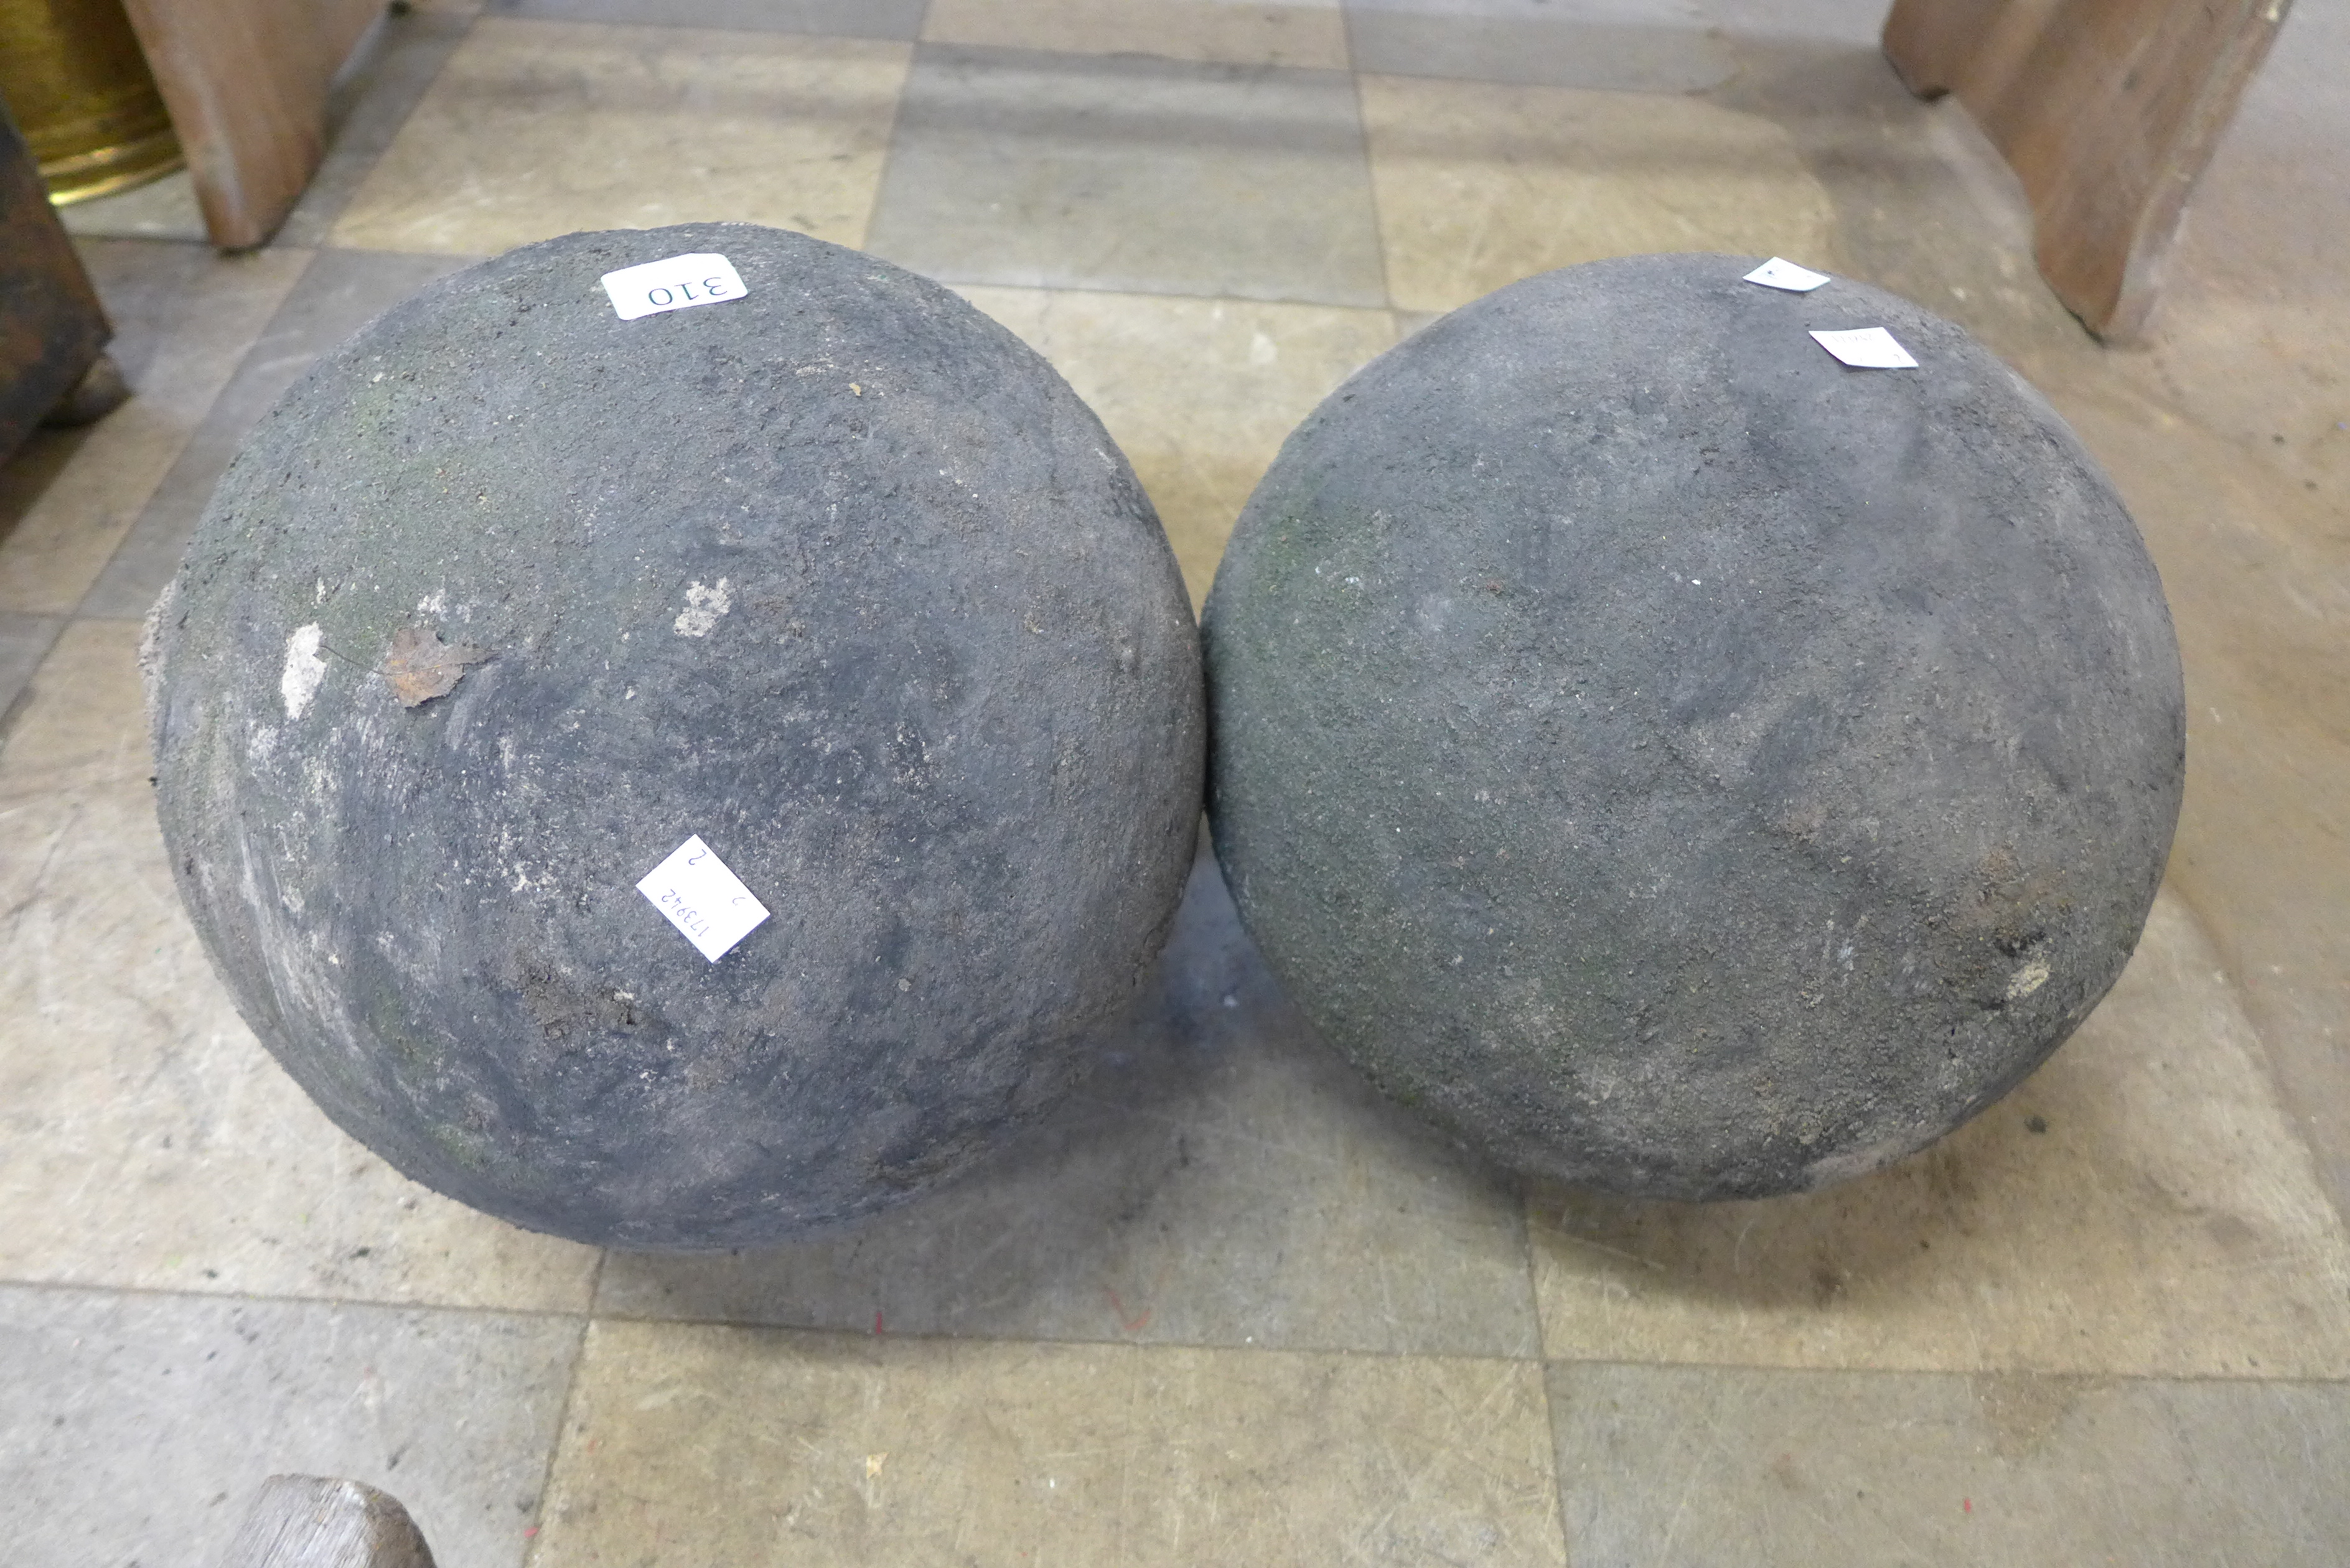 A pair of stone balls